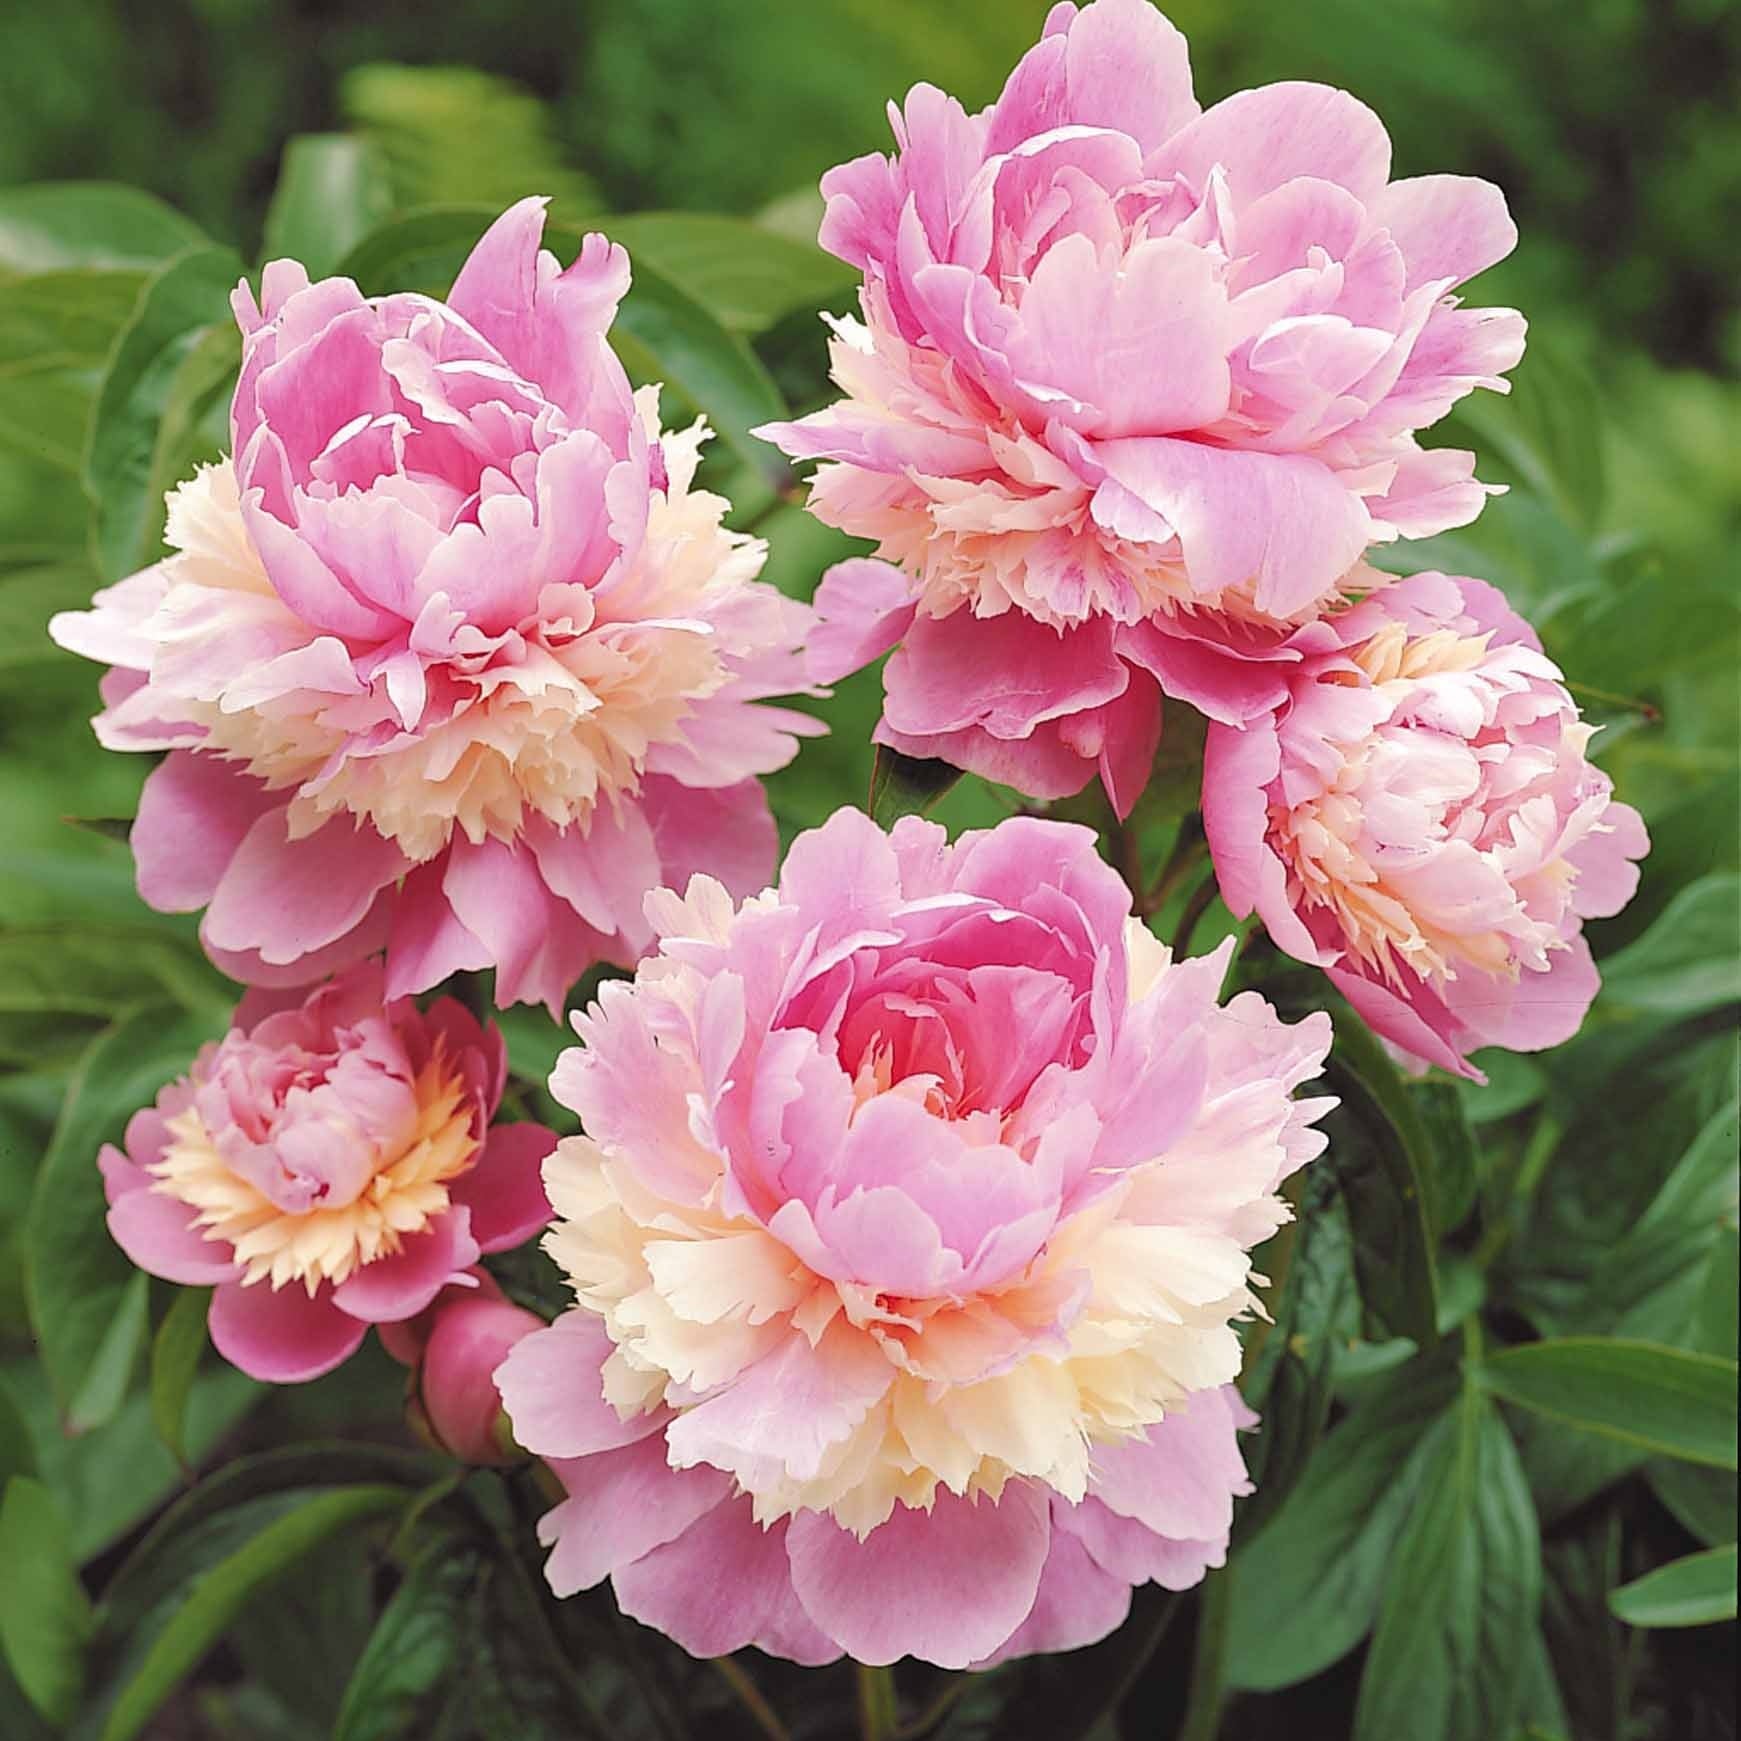 Mélange de 3 pivoines : Immaculée, Sorbet, Red Charm - Paeonia lactiflora x Sorbet, Immaculée, Red Charm